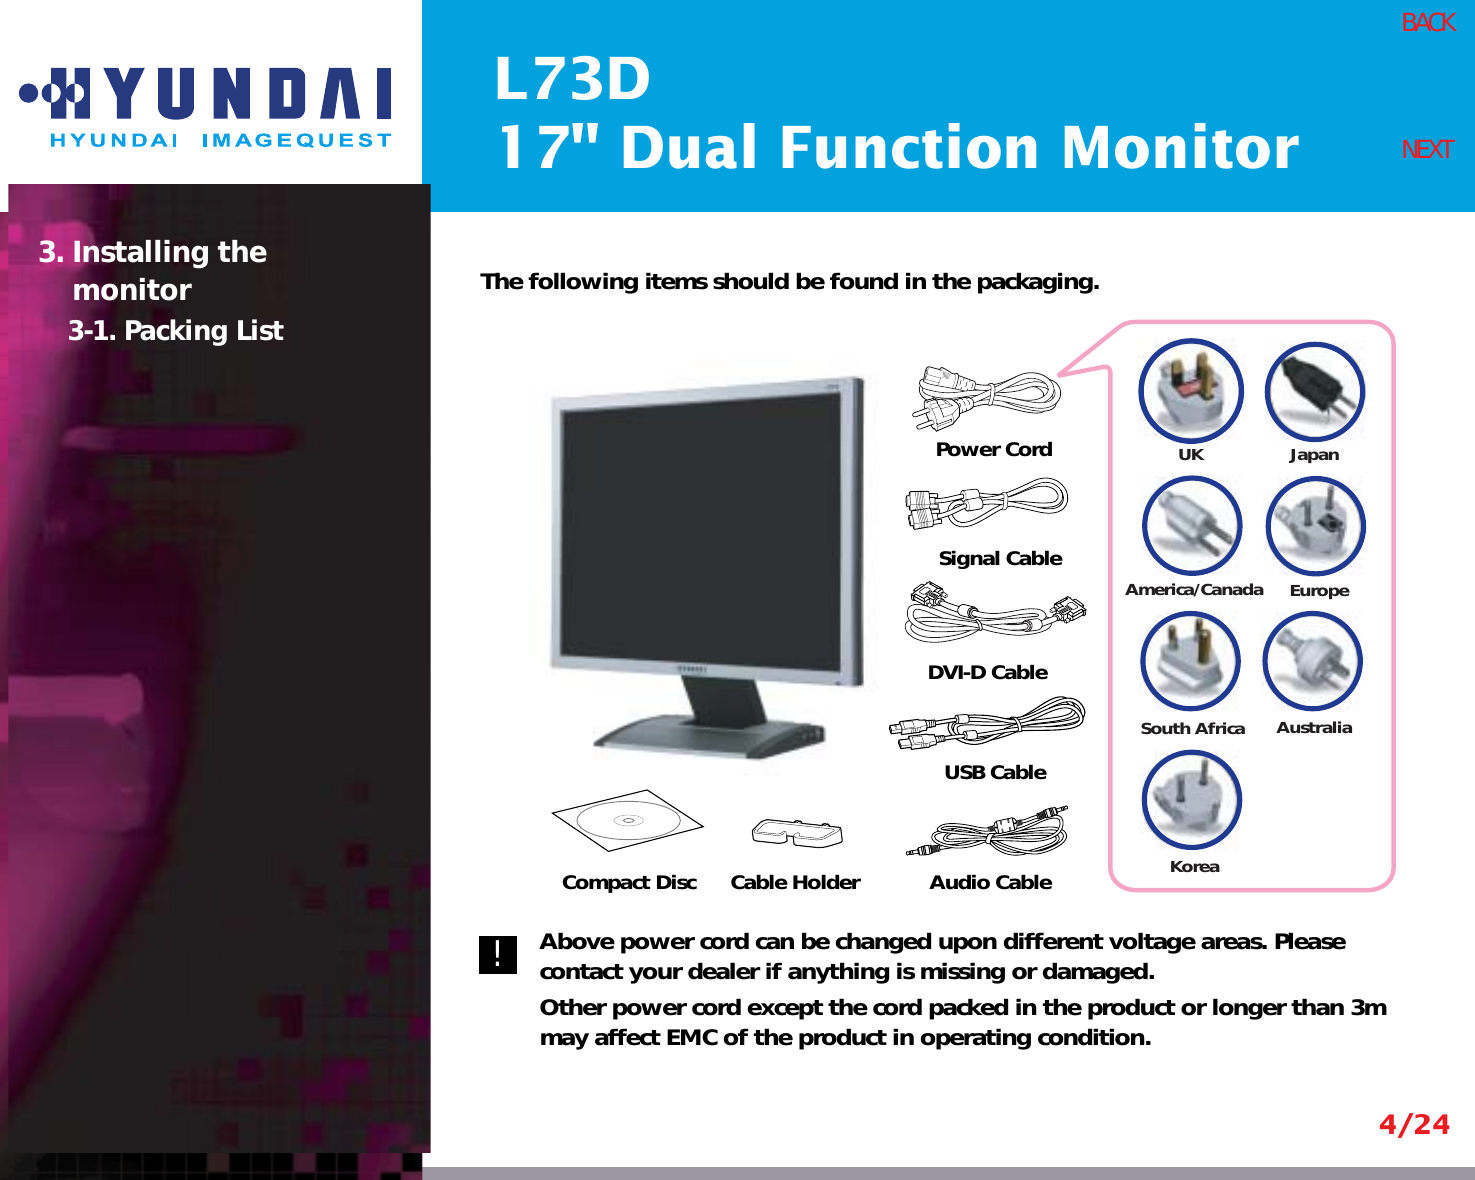 L73D17&quot; Dual Function Monitor4/24BACKNEXTThe following items should be found in the packaging.Above power cord can be changed upon different voltage areas. Pleasecontact your dealer if anything is missing or damaged.Other power cord except the cord packed in the product or longer than 3mmay affect EMC of the product in operating condition.3. Installing the monitor3-1. Packing List!UKAmerica/CanadaJapanAustraliaKoreaEuropeSouth AfricaPower CordSignal CableDVI-D CableCompact Disc Cable Holder Audio Cable USB Cable